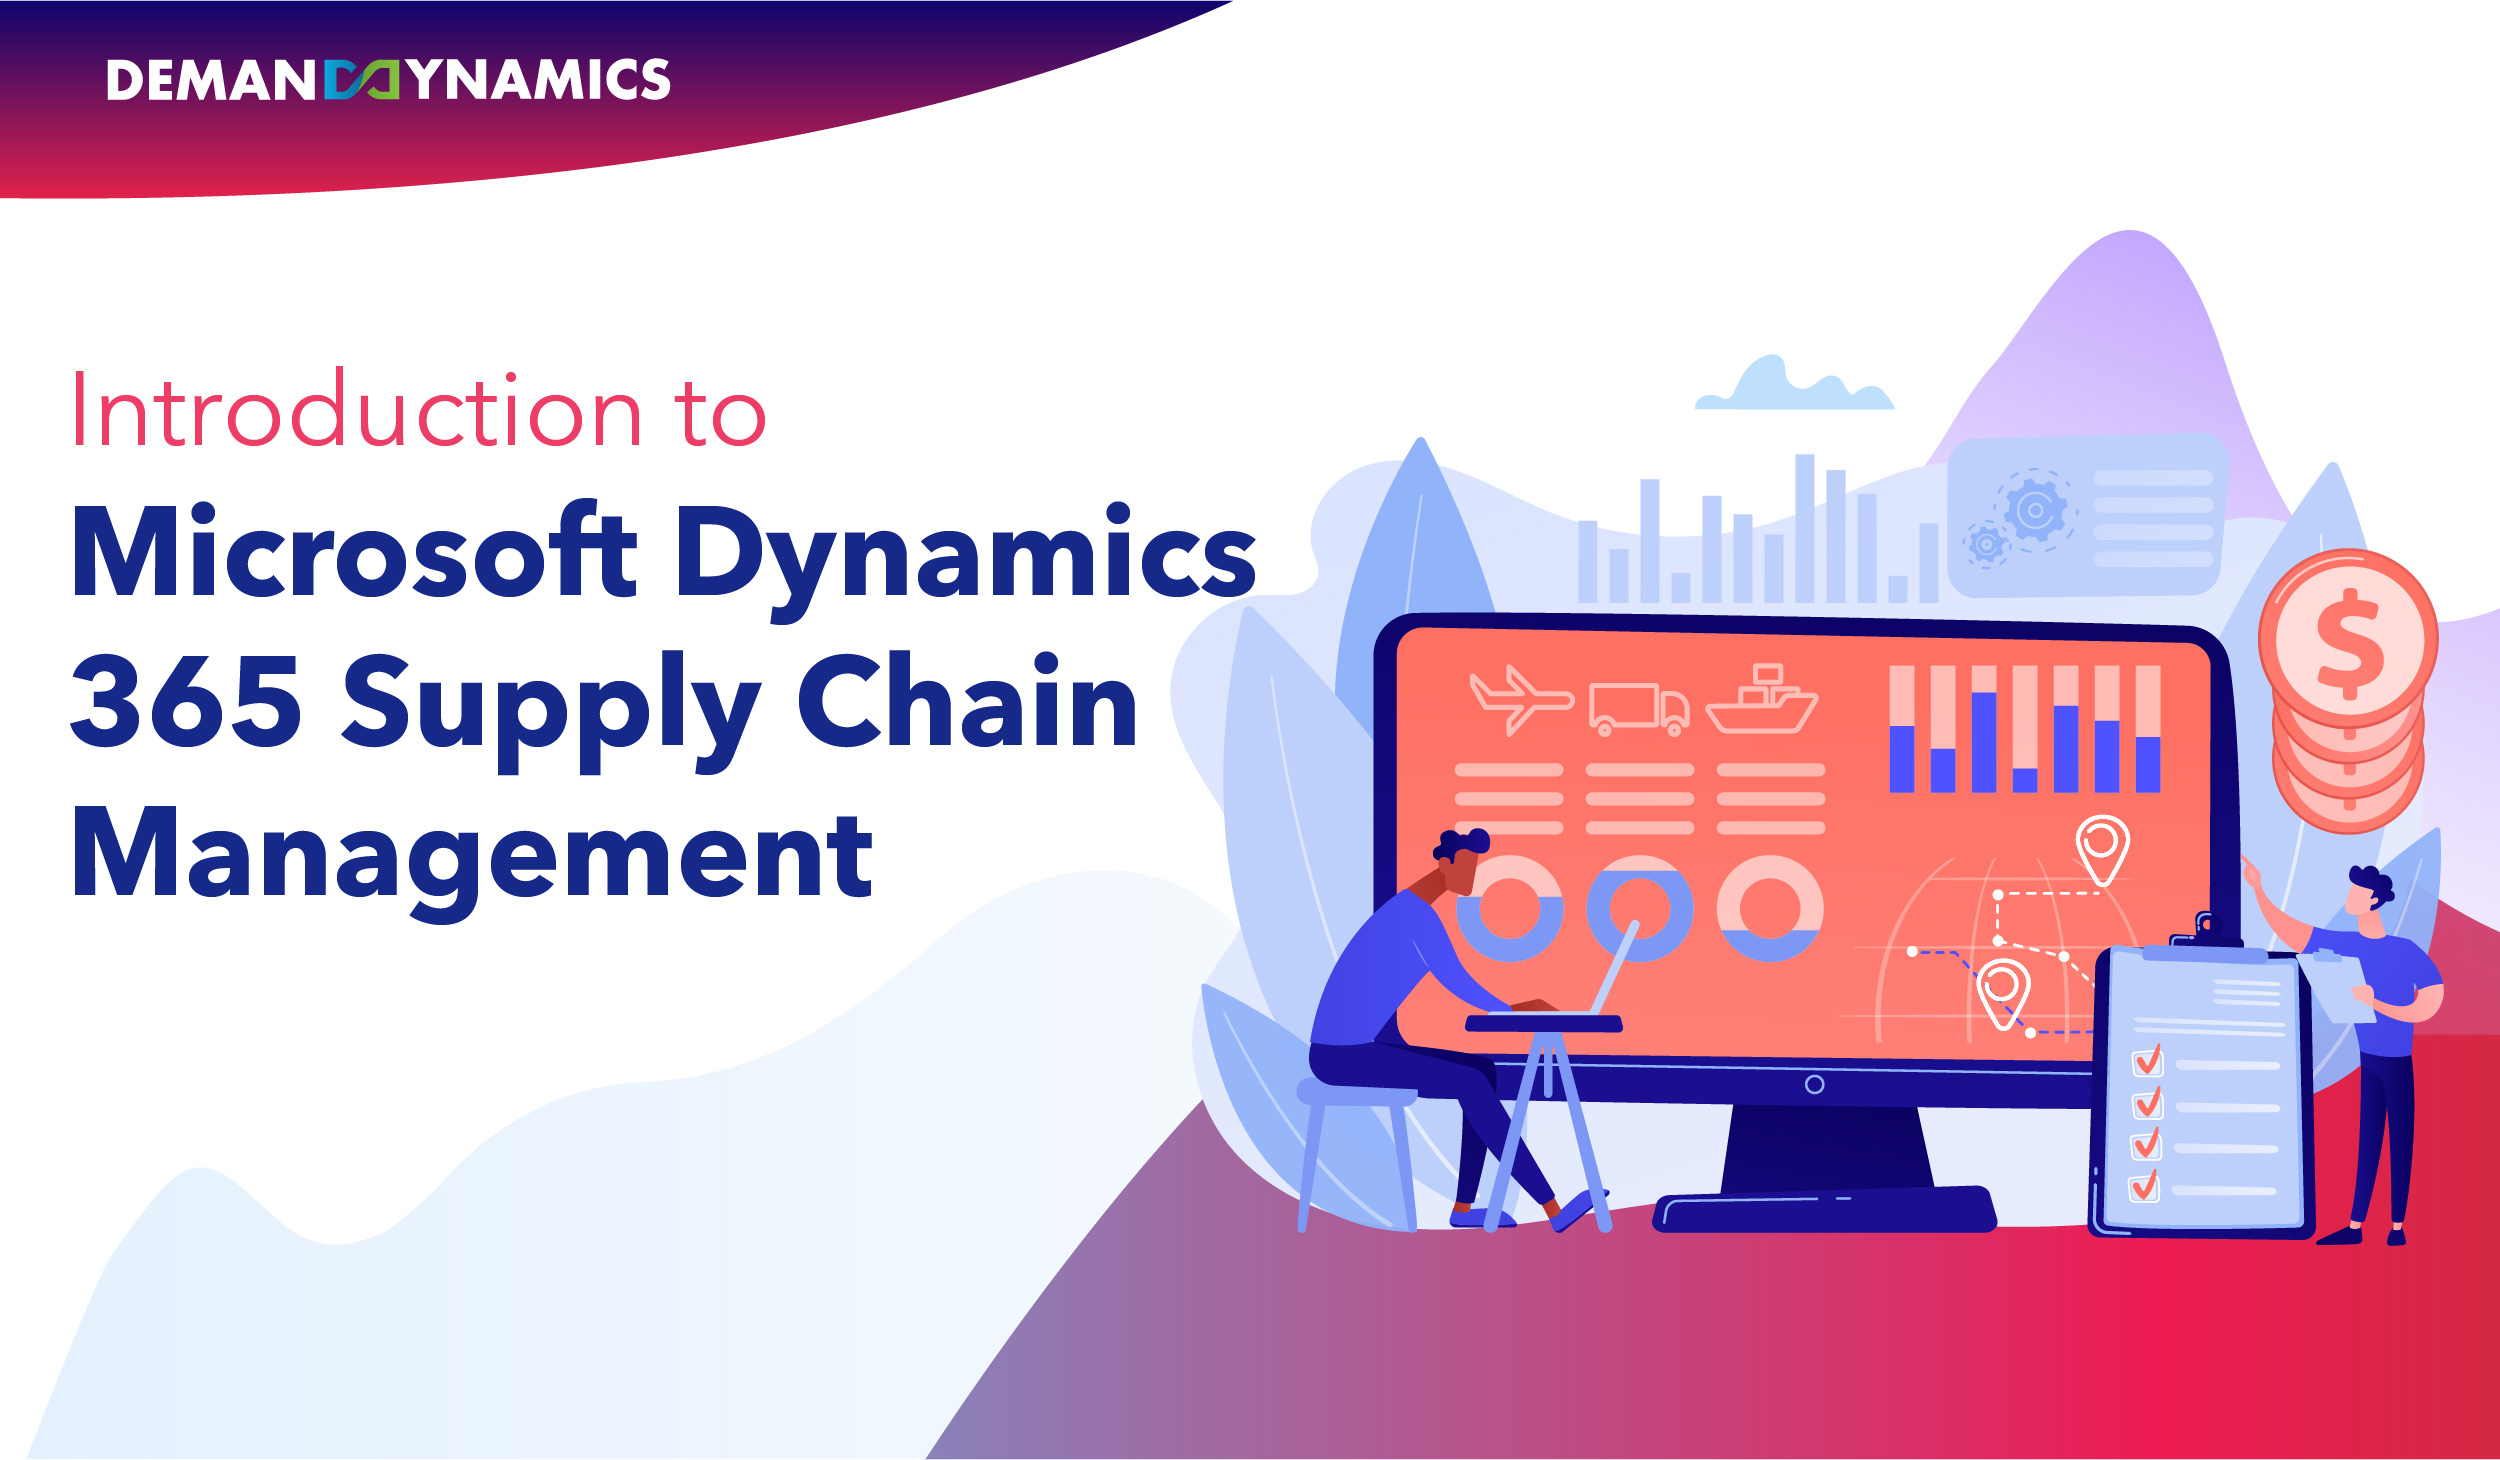 Getting started with Microsoft Dynamics 365 Supply Chain Management